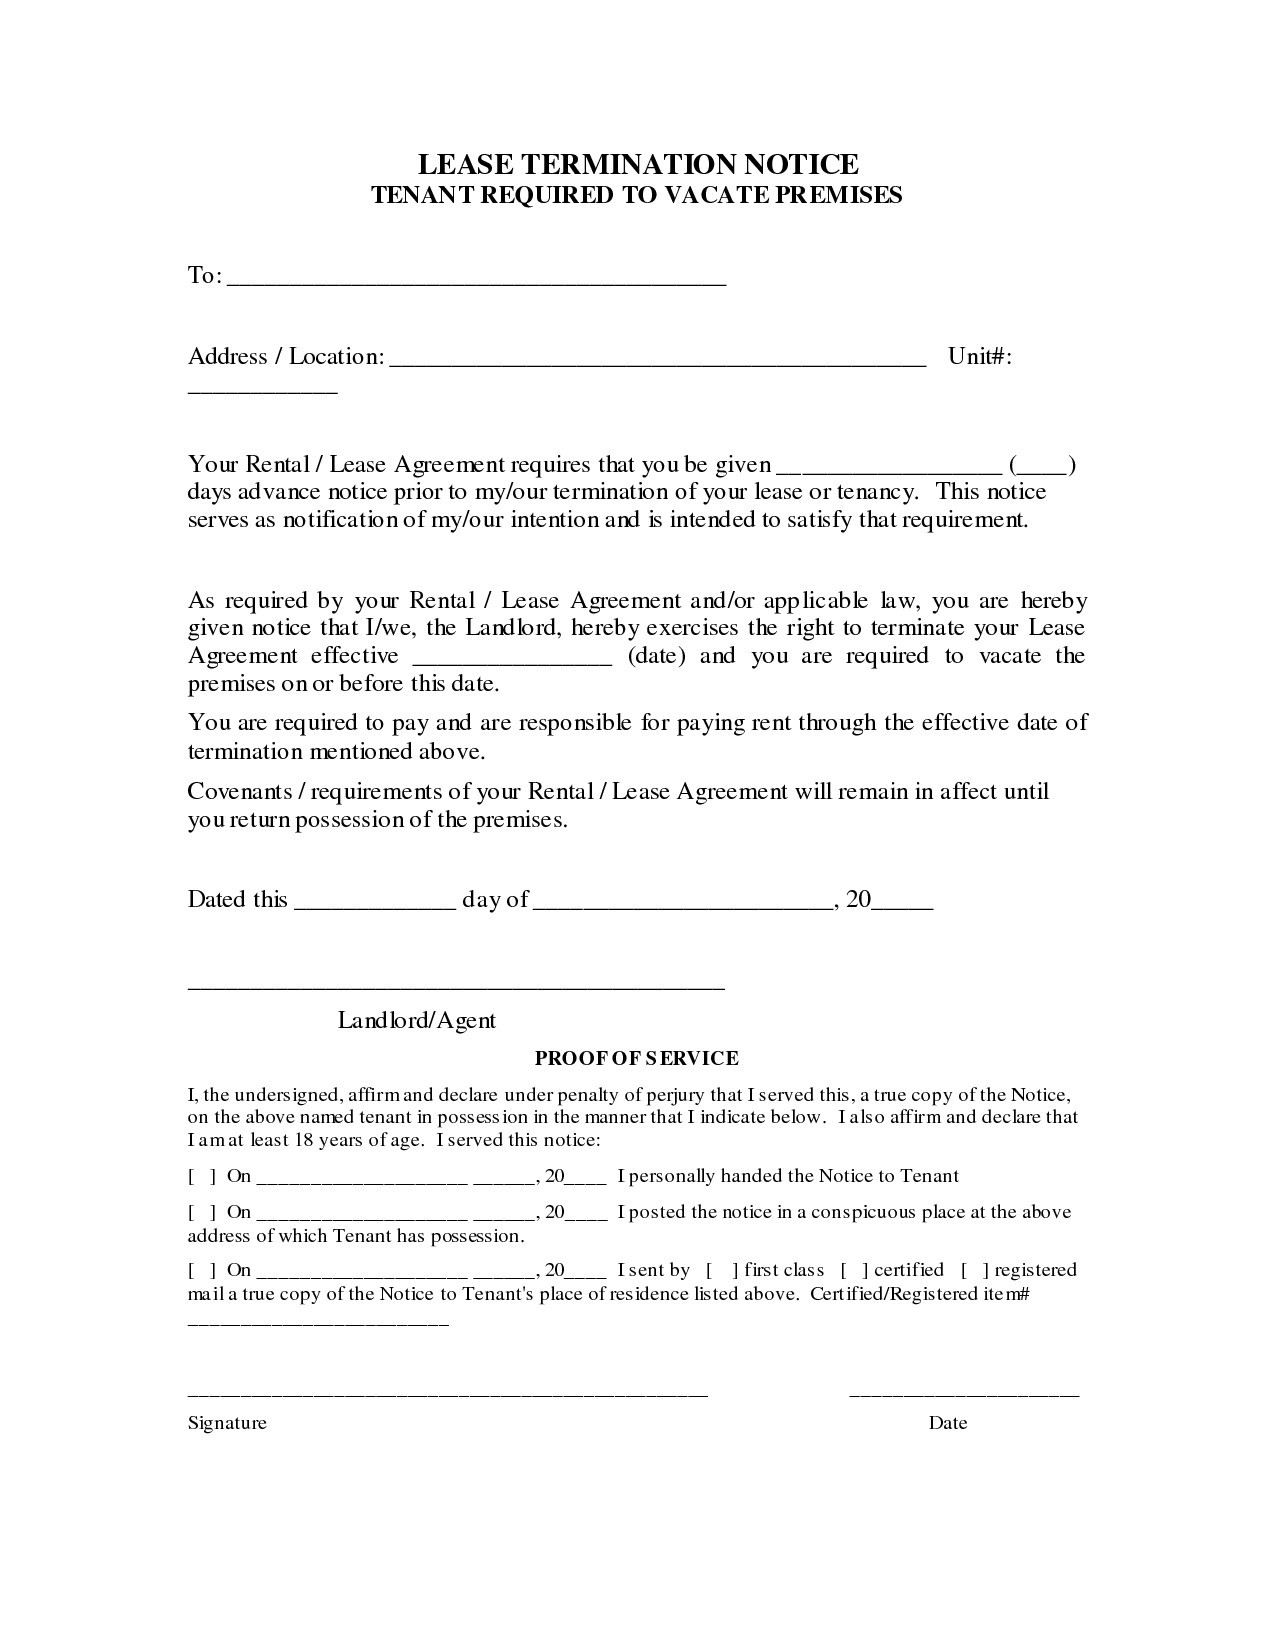 early lease termination letter to landlord template Collection-Letter format for Agreement Termination Best Breach Contract Termination Letter Template Copy Example 20-p